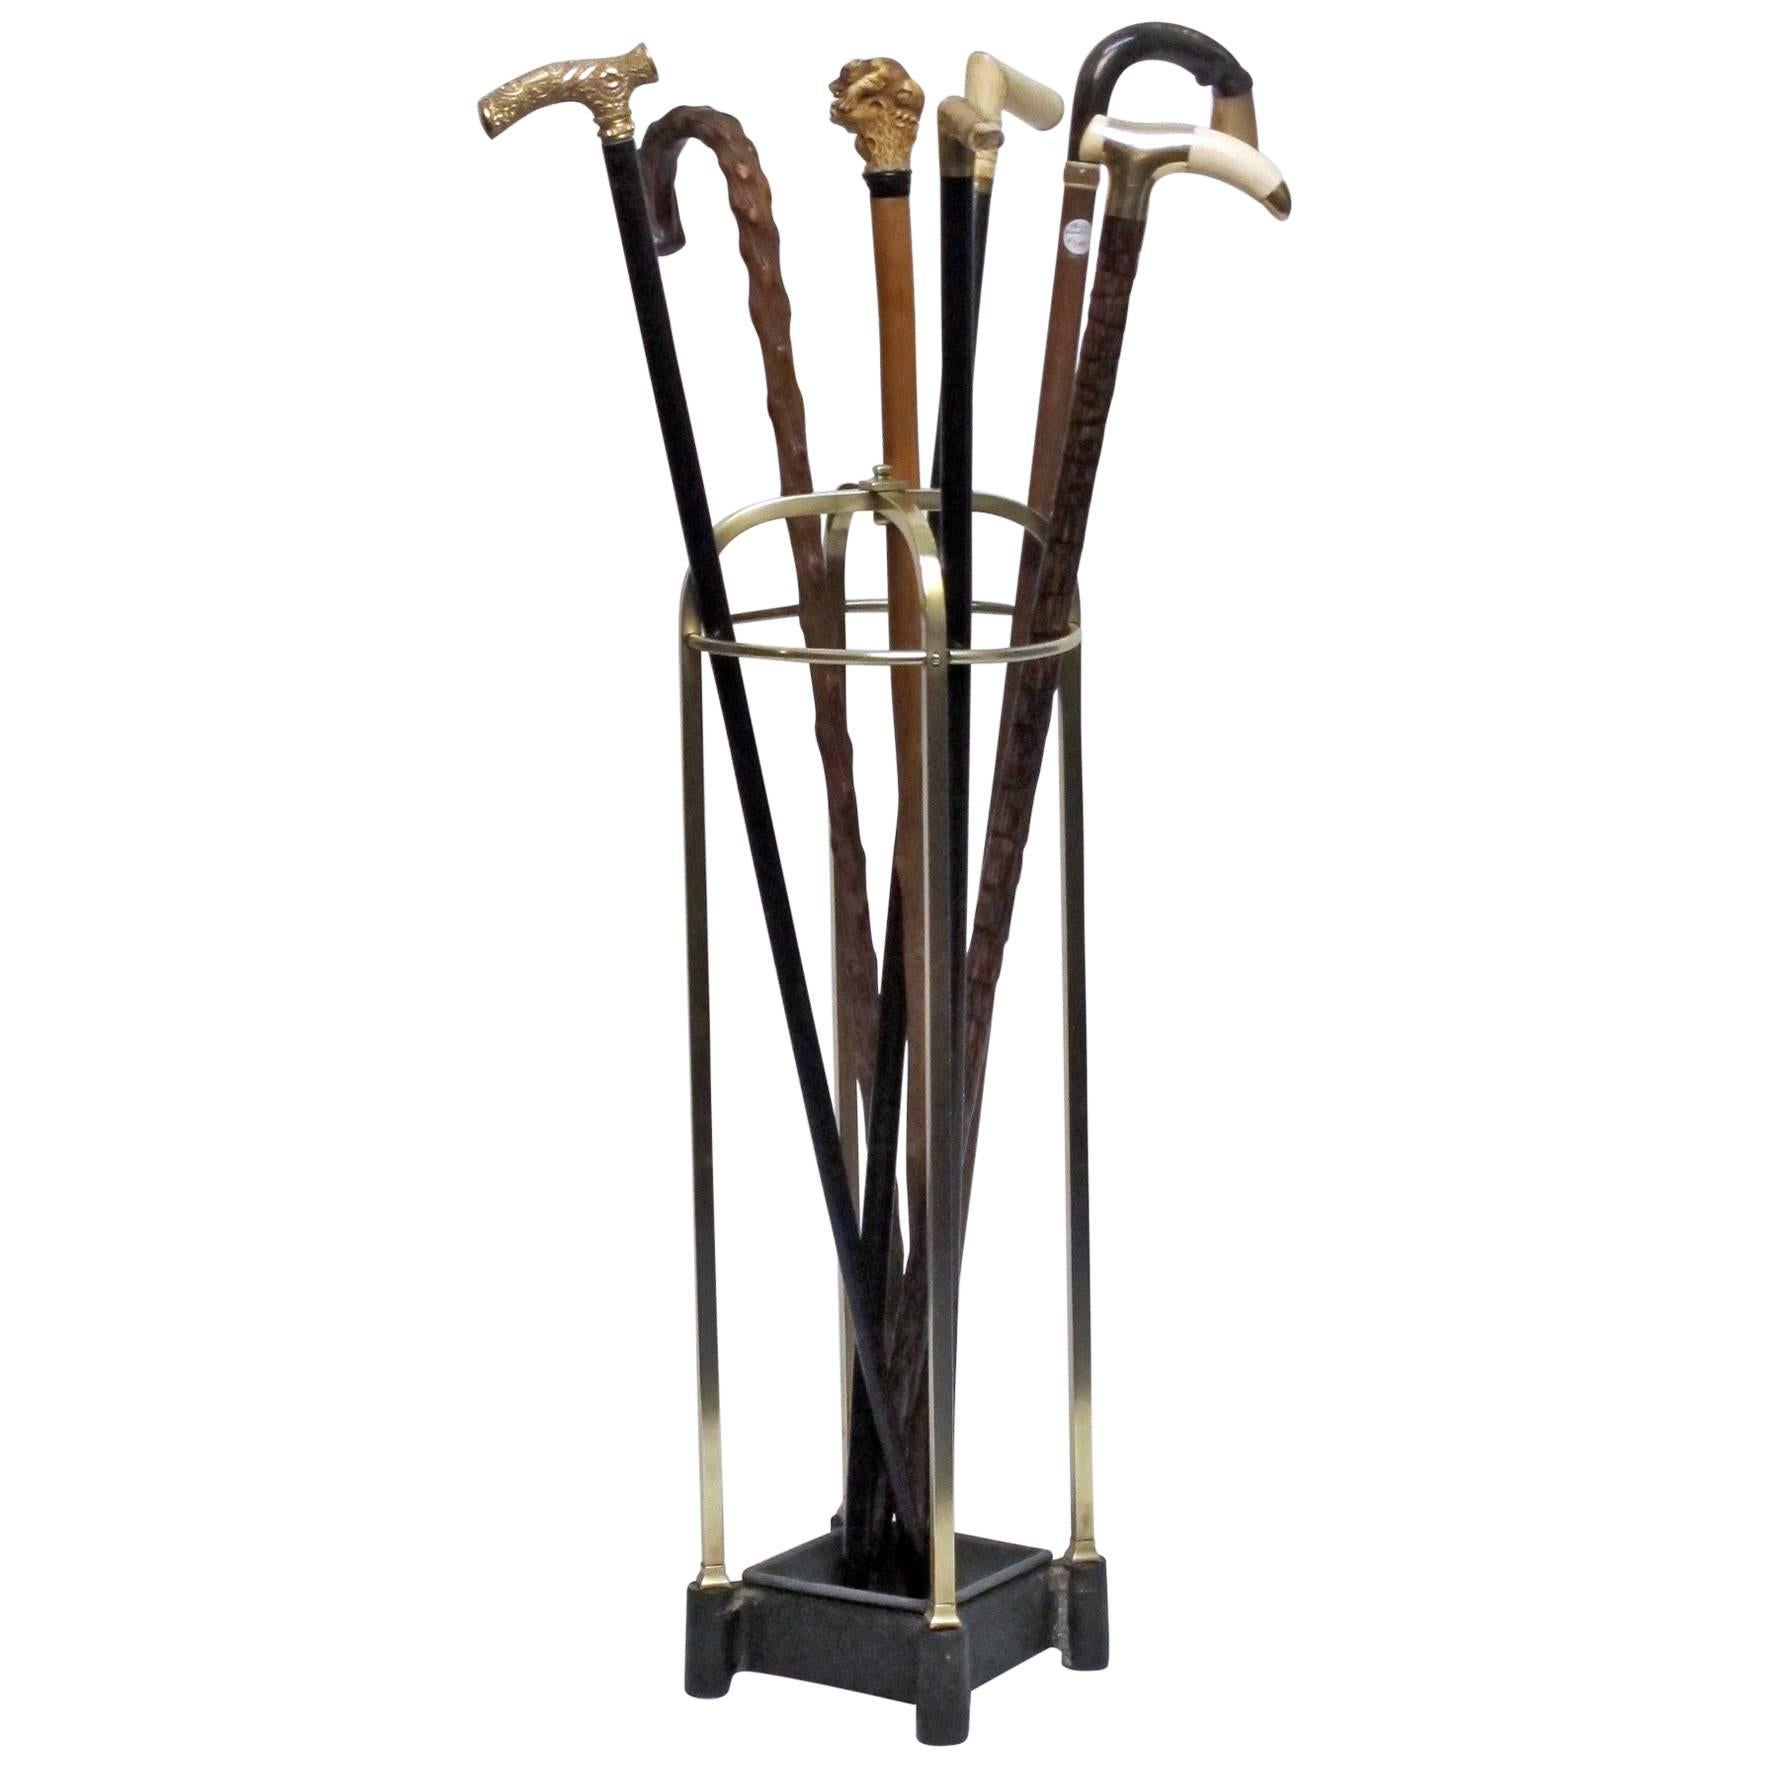 Brass and cast iron walking stick, cane or umbrella stand.